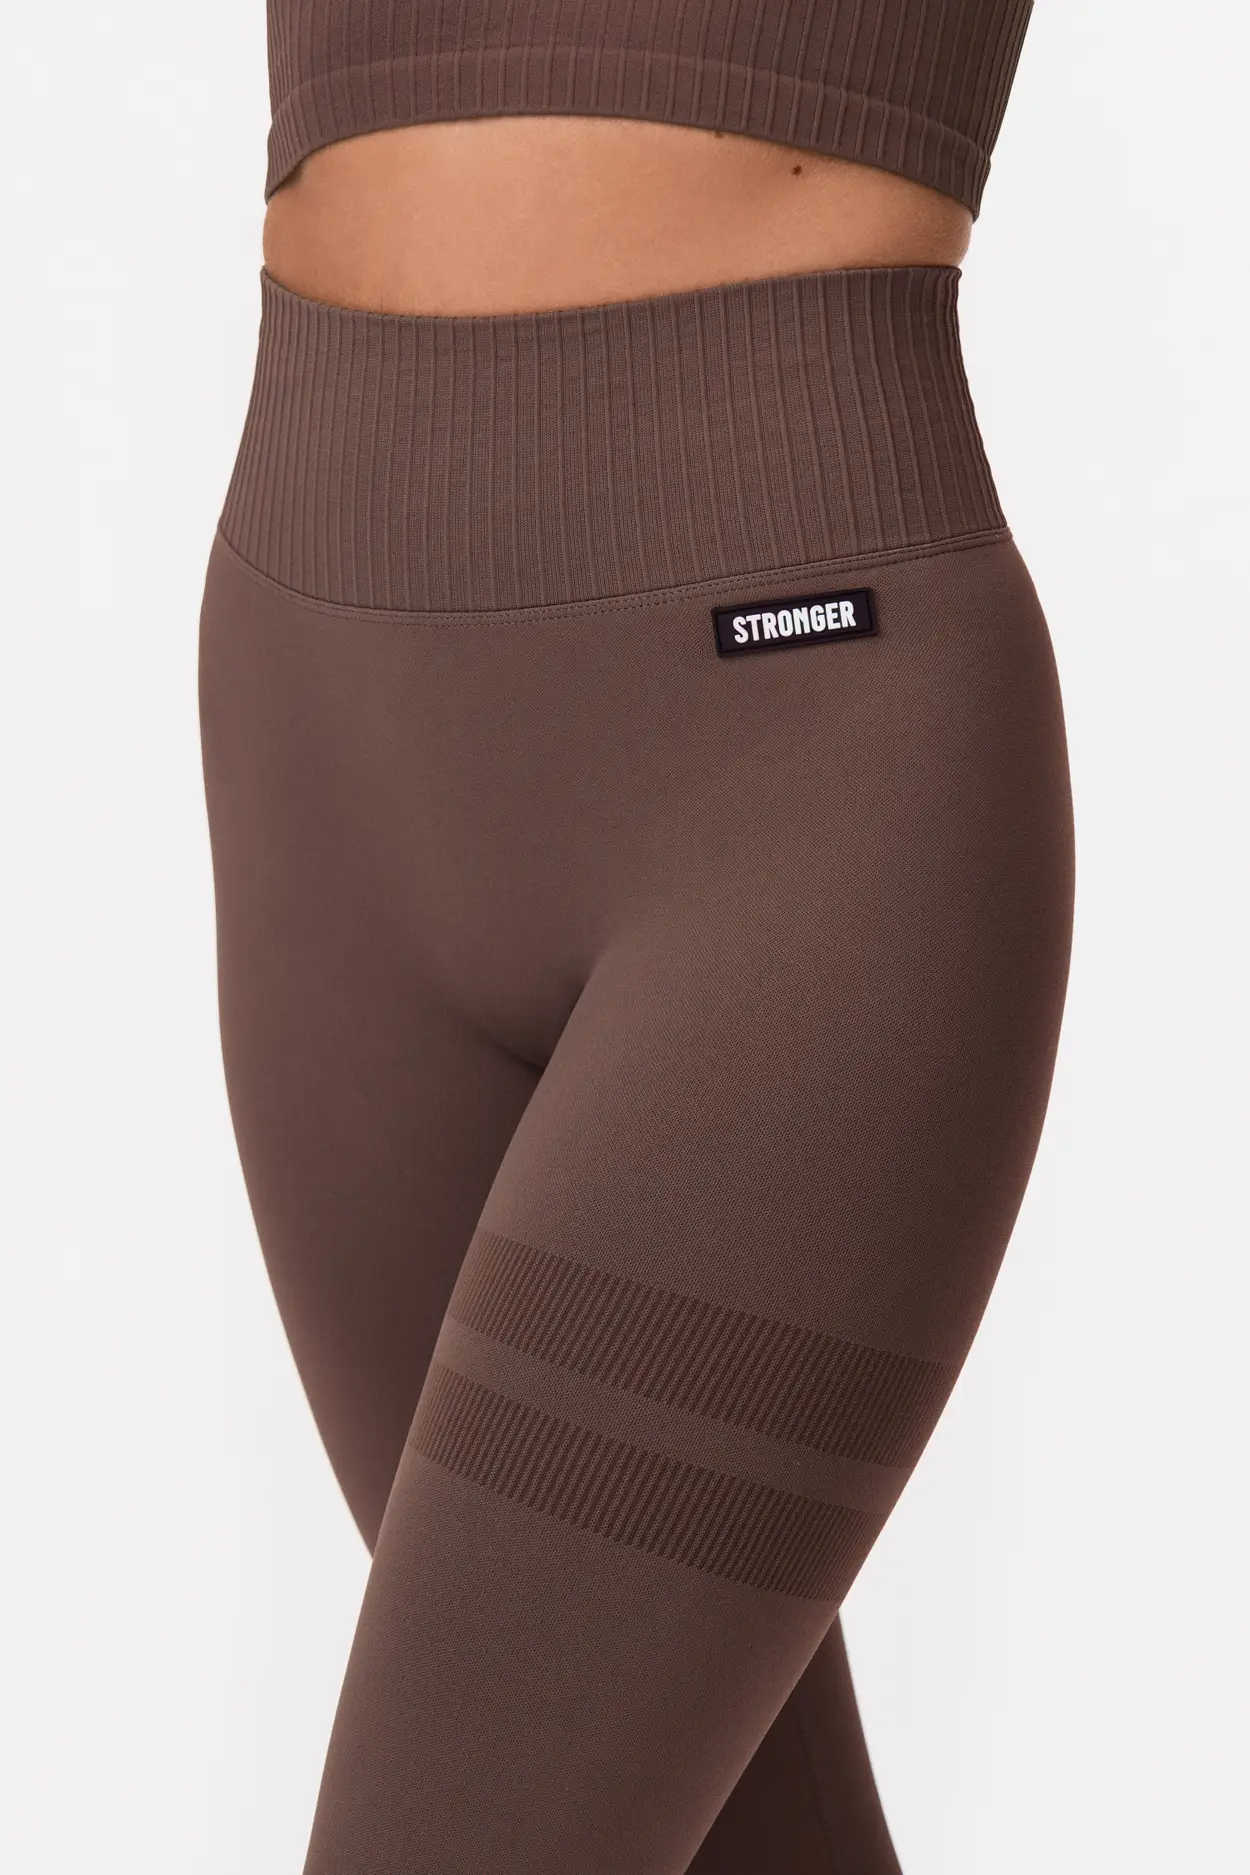 Compression Leggings for Women - Cool Brown